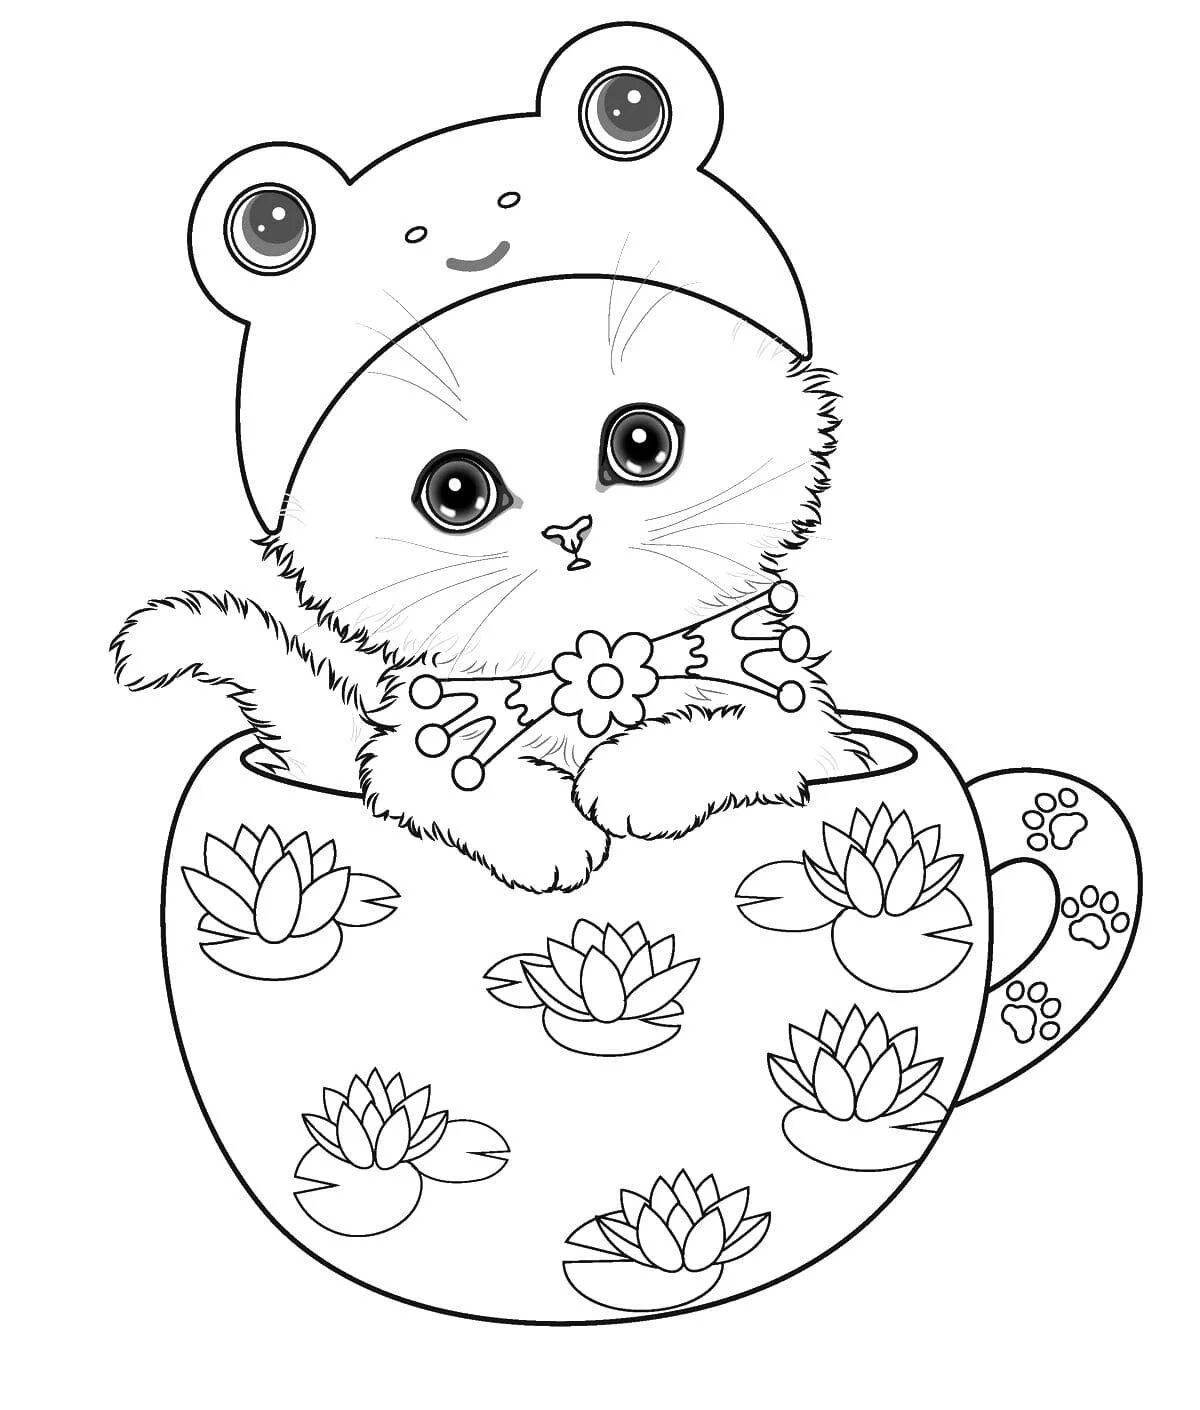 Coloring book witty cat